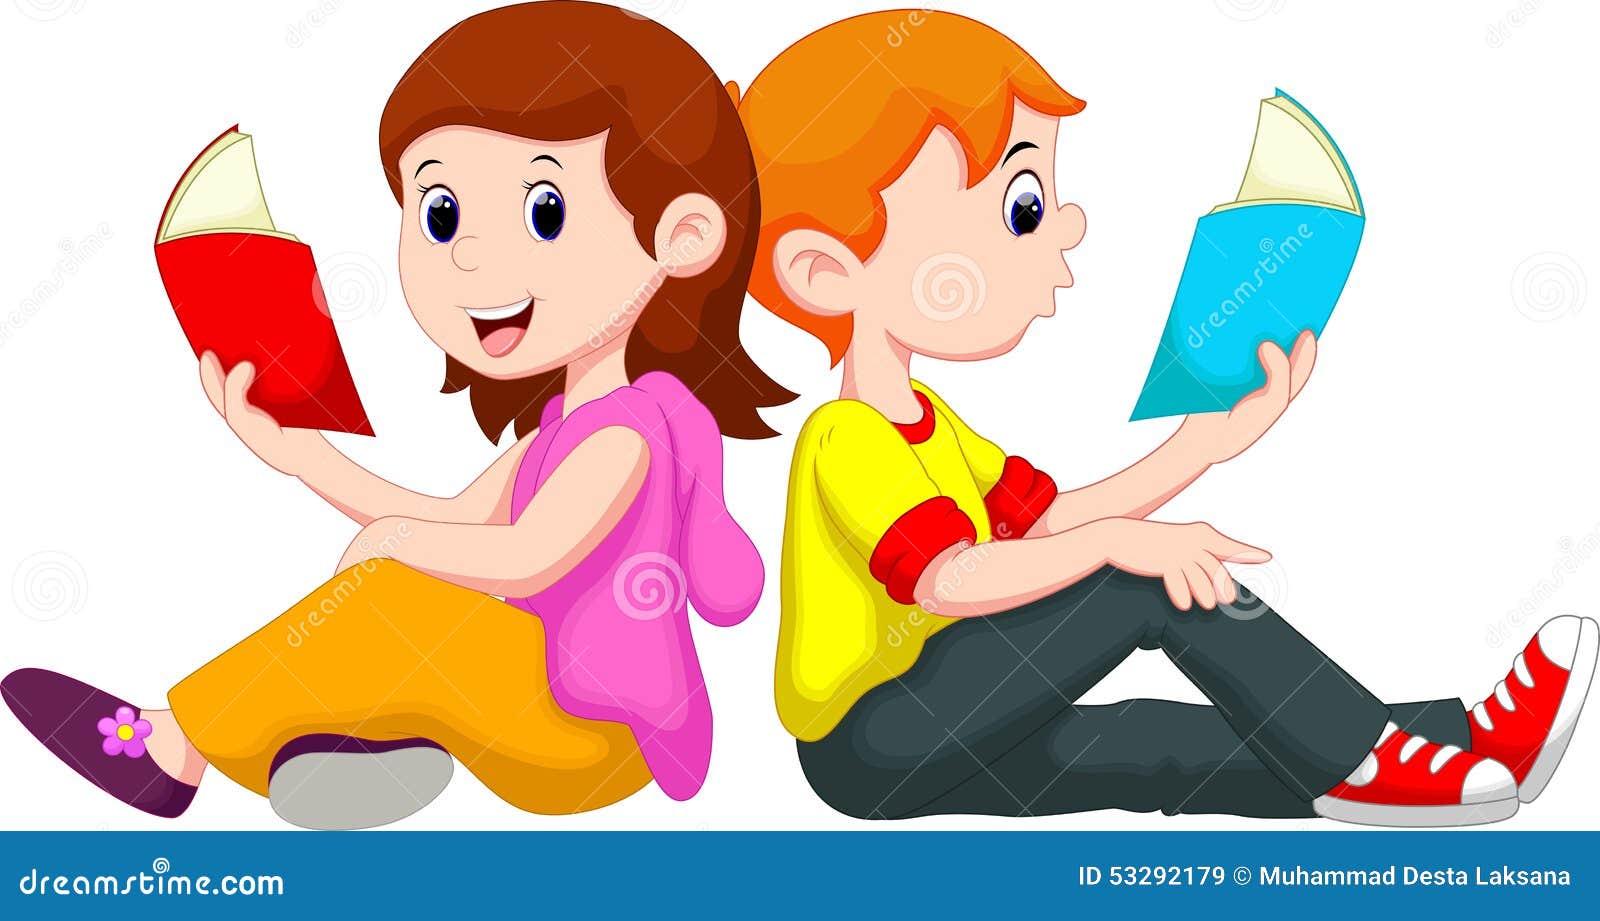 free clipart girl reading - photo #22